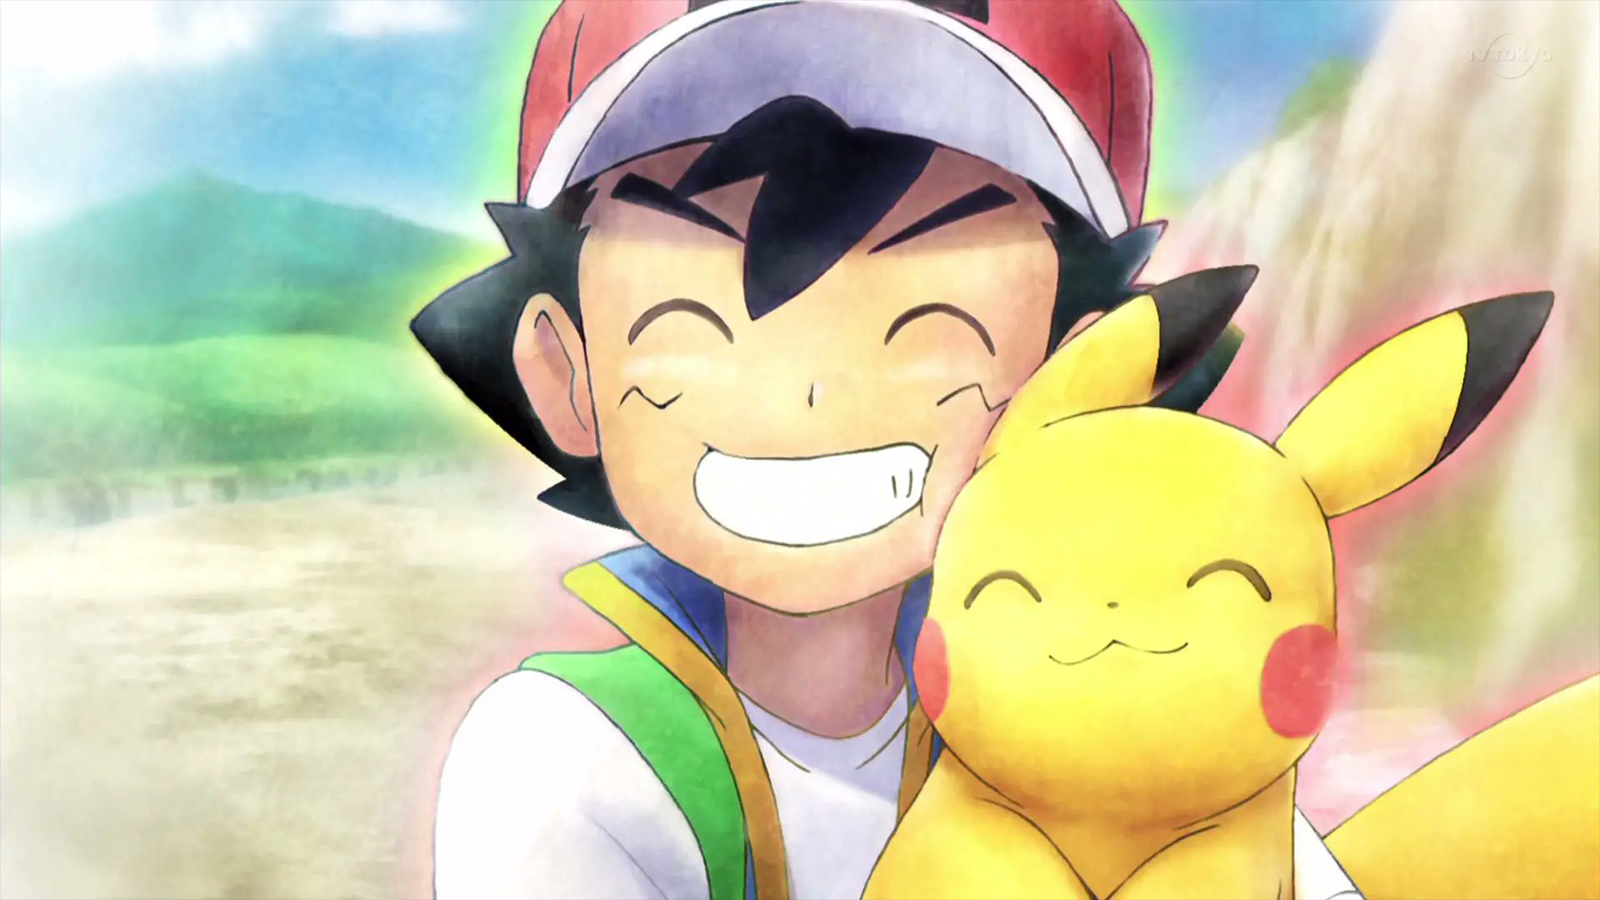 It Looks Like The Pokemon Anime Is Coming To An End